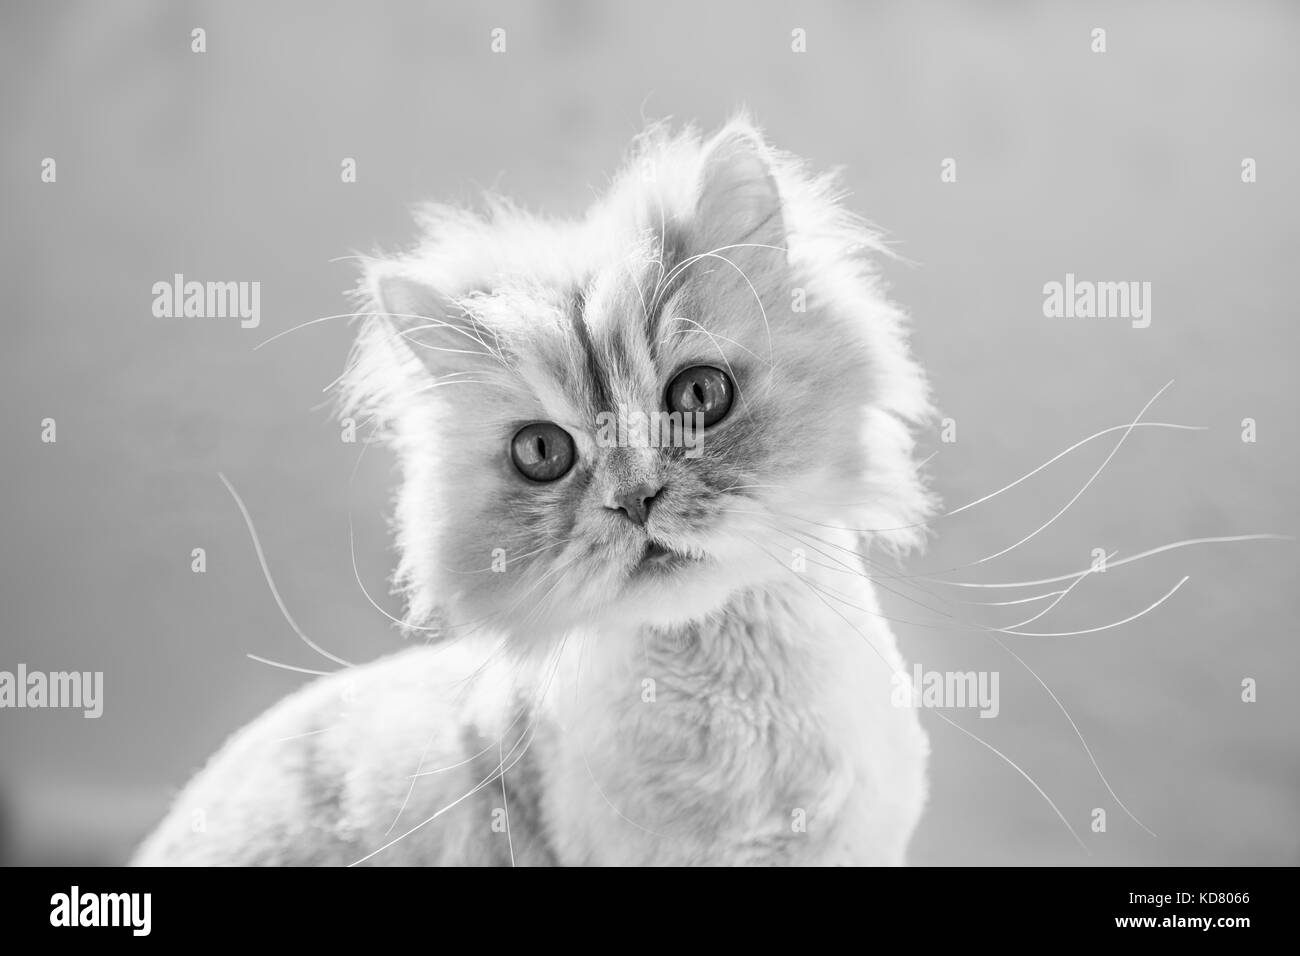 Cute fluffy white cat with intense staring eyes and long whiskers, in black and white (monochrome) Stock Photo